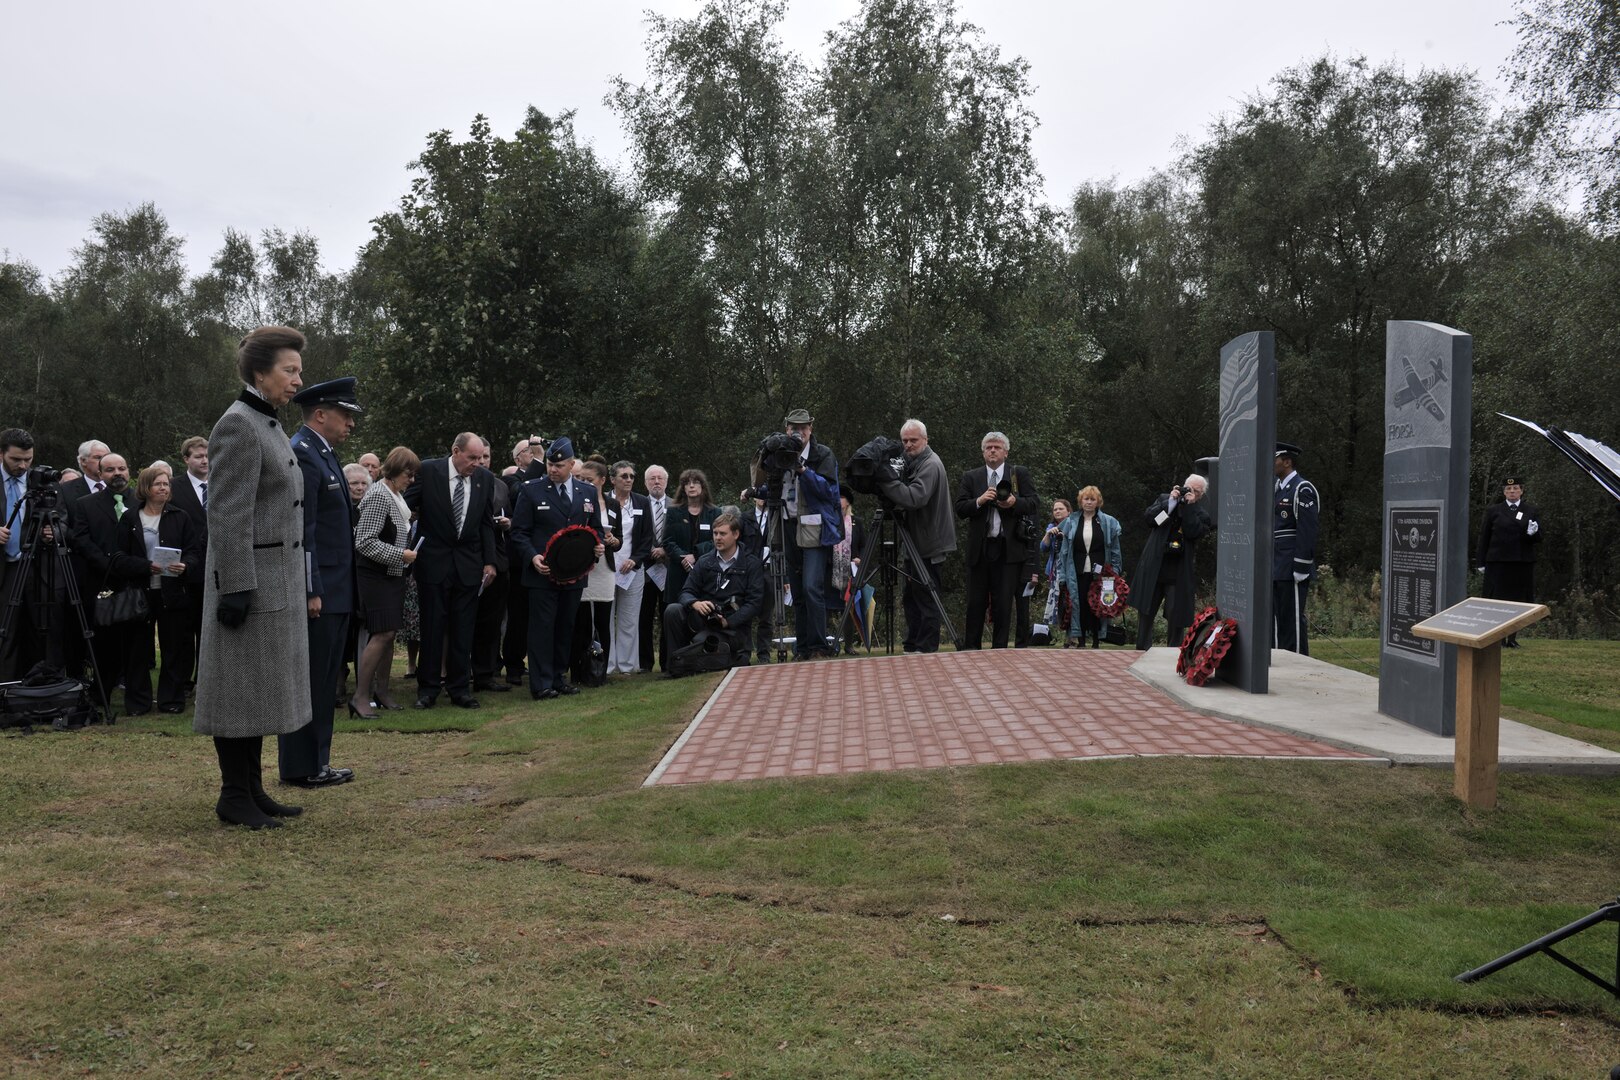 GREENHAM COMMON, United Kingdom – Her Royal Highness, Princess Anne, The Princess Royal and Col. Brian Kelly, 501st Combat Support Wing commander, pause for a moment of silence to honor the American servicemen who were based locally and lost their lives during World War II. Her Royal Highness dedicated three memorial stones for U.S. Visiting Forces at the Greenham Business Park in Greenham Common, United Kingdom, Sept. 21. The three-part memorial is in remembrance of 16 service members killed when two B-17 Flying Fortresses collided above Greenham Common Dec. 15, 1944; 33 Airmen who died just three days earlier when their Horsa Glider crashed on takeoff at the base; and American servicemen who were based locally and lost their lives during World War II. (U.S. Air Force photo by Master Sgt. John Barton)